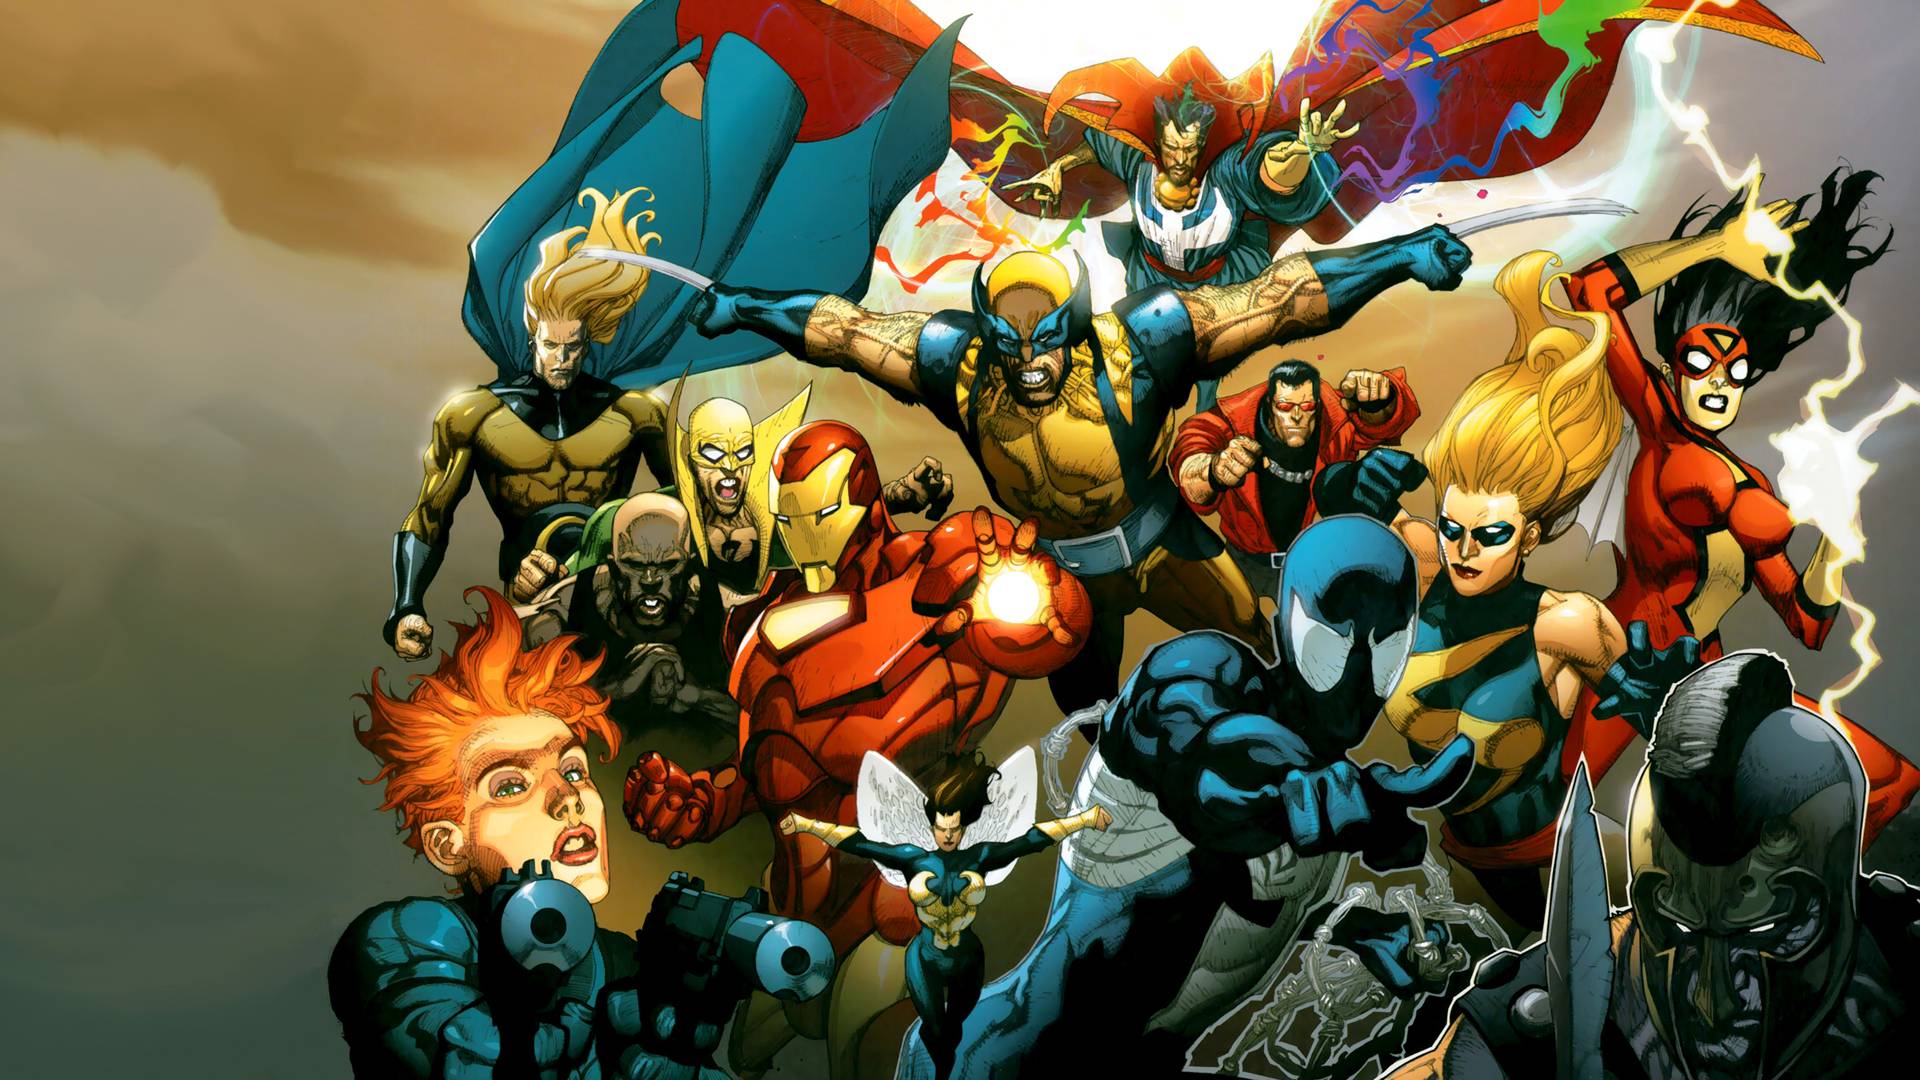 Cool Marvel Wallpaper New One 1920x1080PX